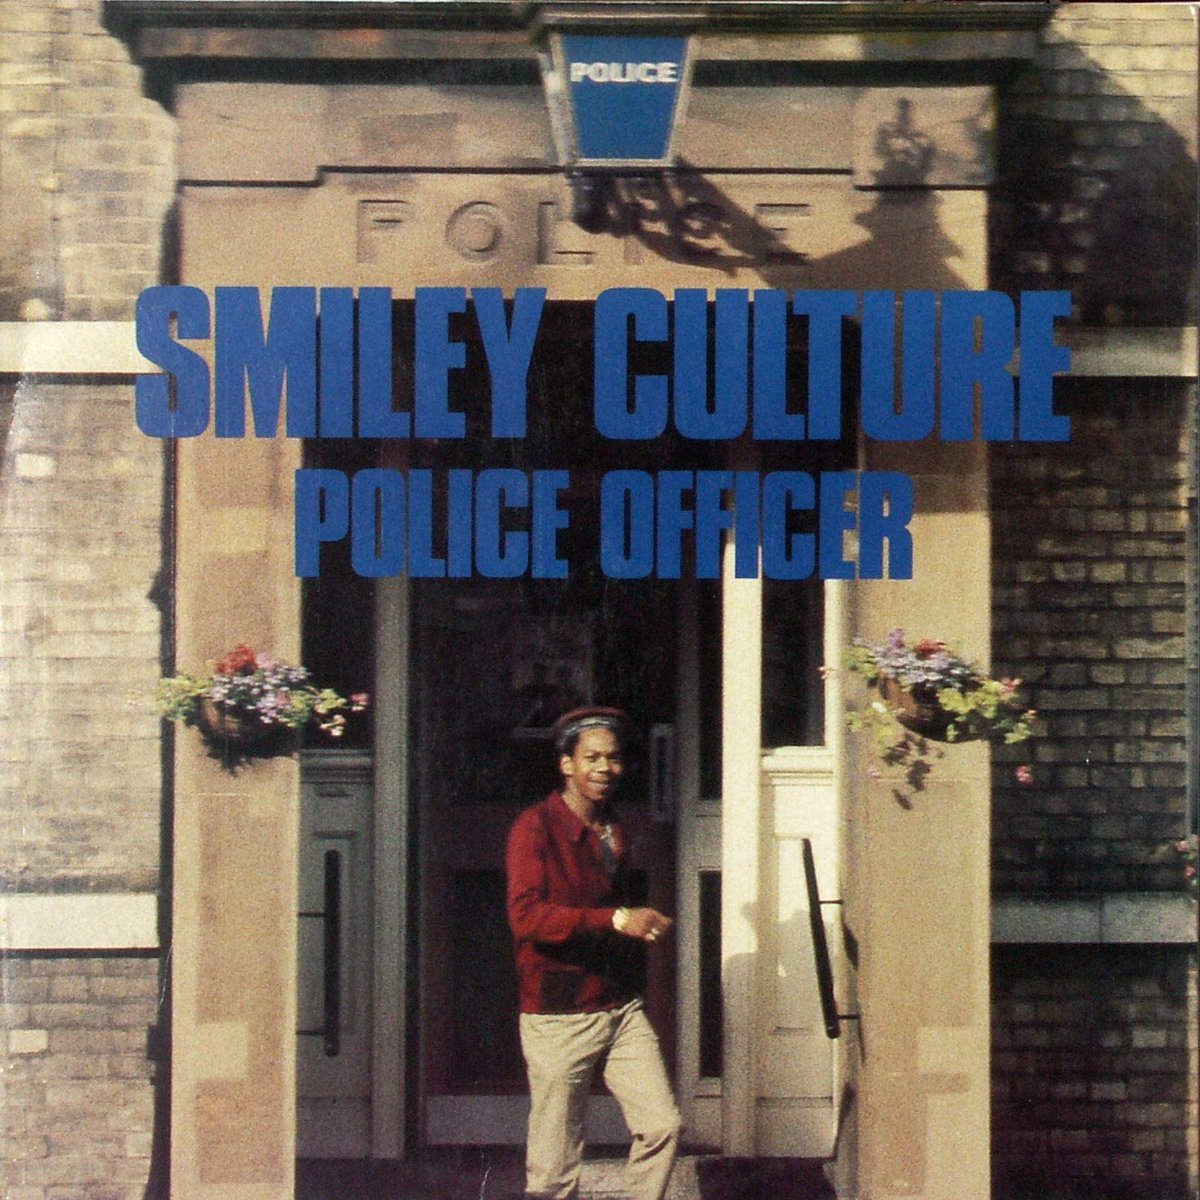 And Fashion Records brings us to...Fast chat origination.Smiley Culture topped the charts with the "new" style when Police Officer reached 12 in the UK in '84. Doubt I need to share it, but why not? Smiley on TOTP 